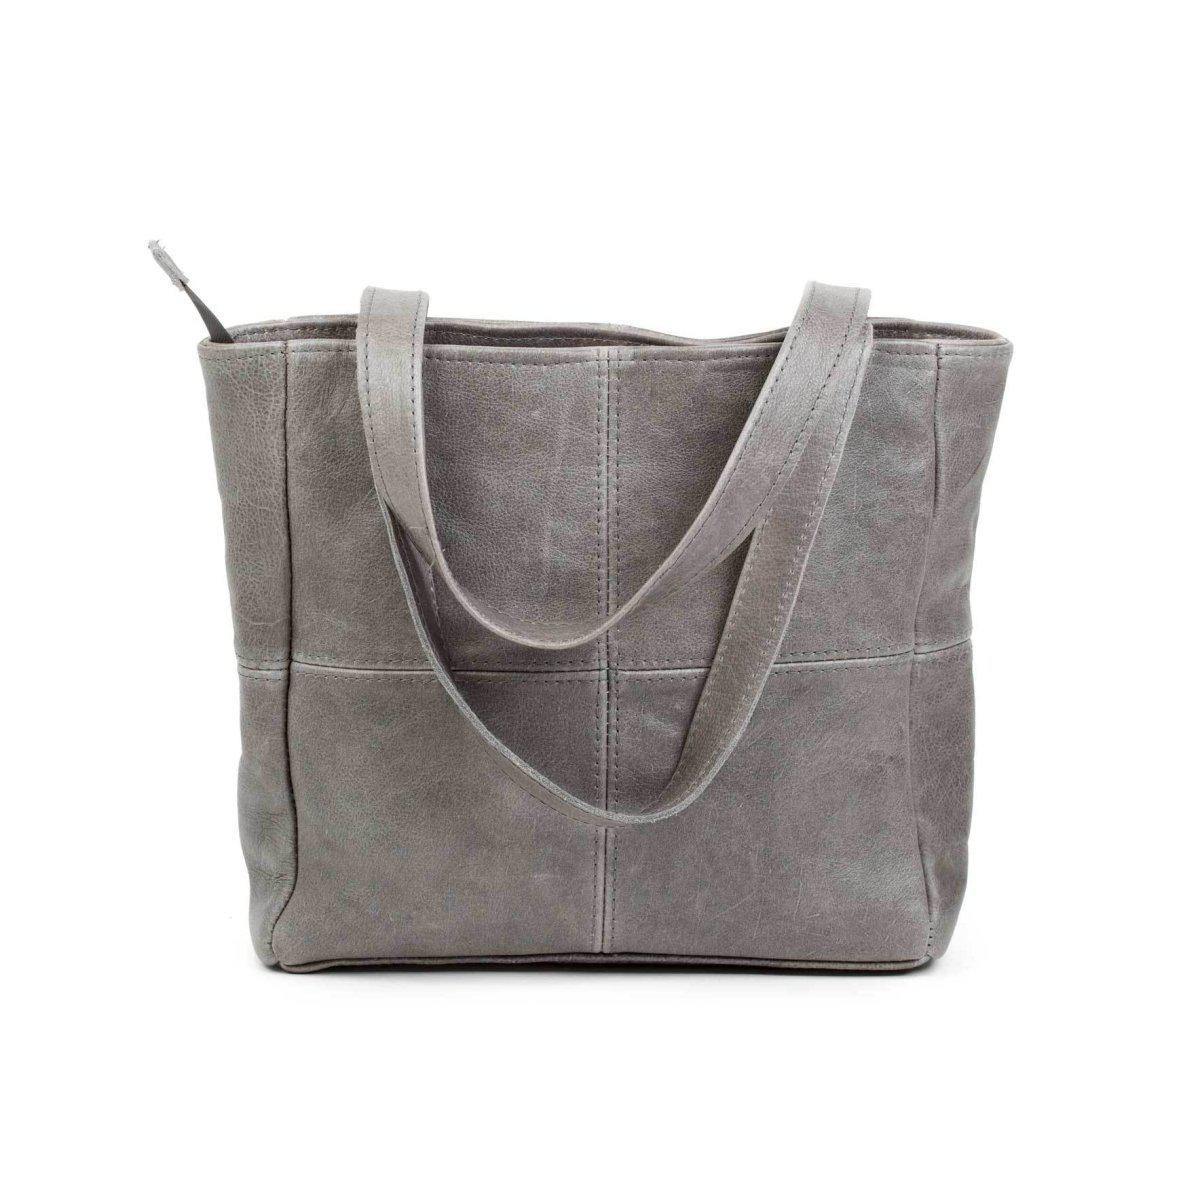 Mirelle Leather Shopper (Small) And Classic Purse - Combo - Mirelle Leather and Lifestyle